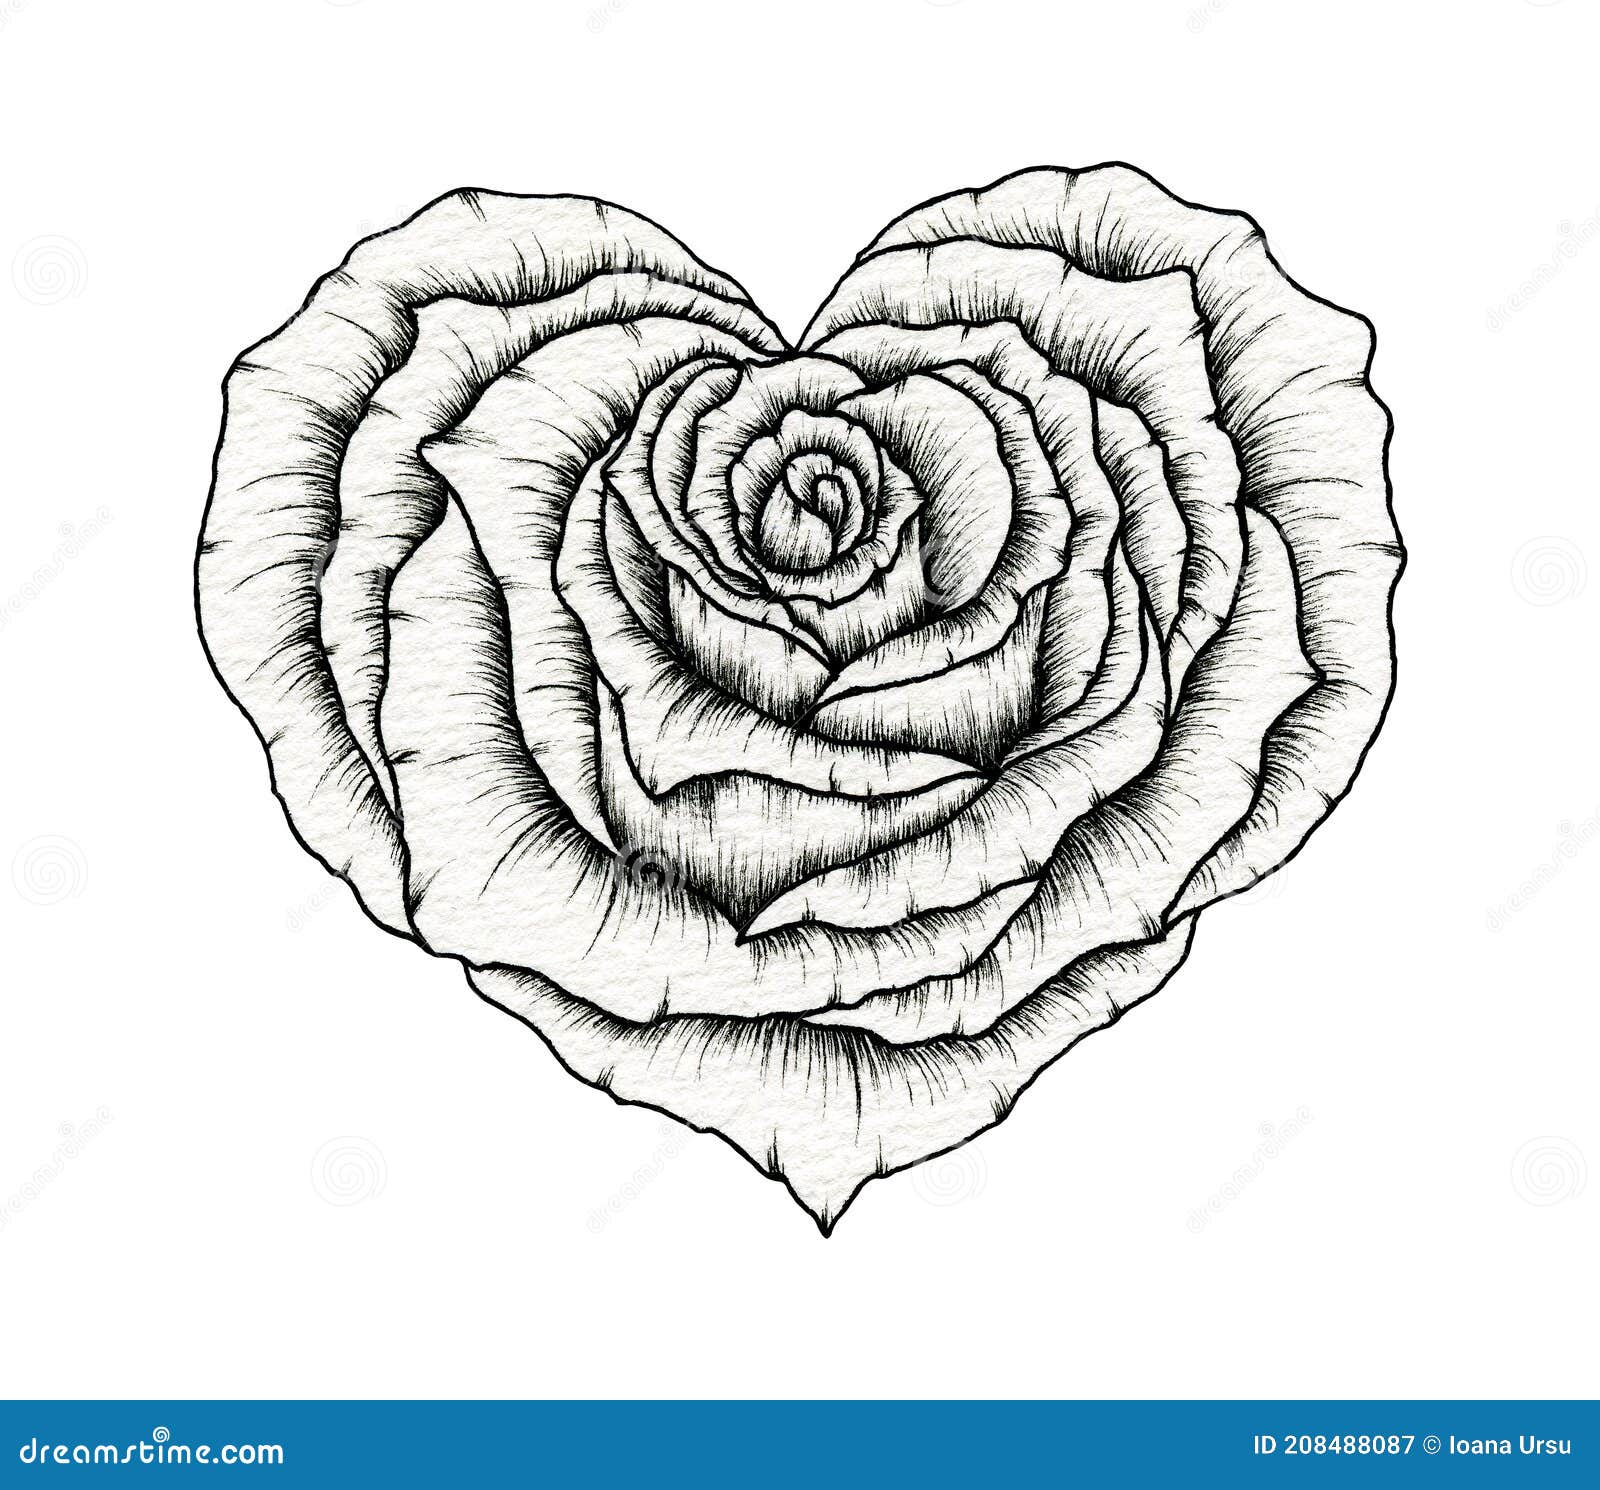 Roses Drawings With Hearts